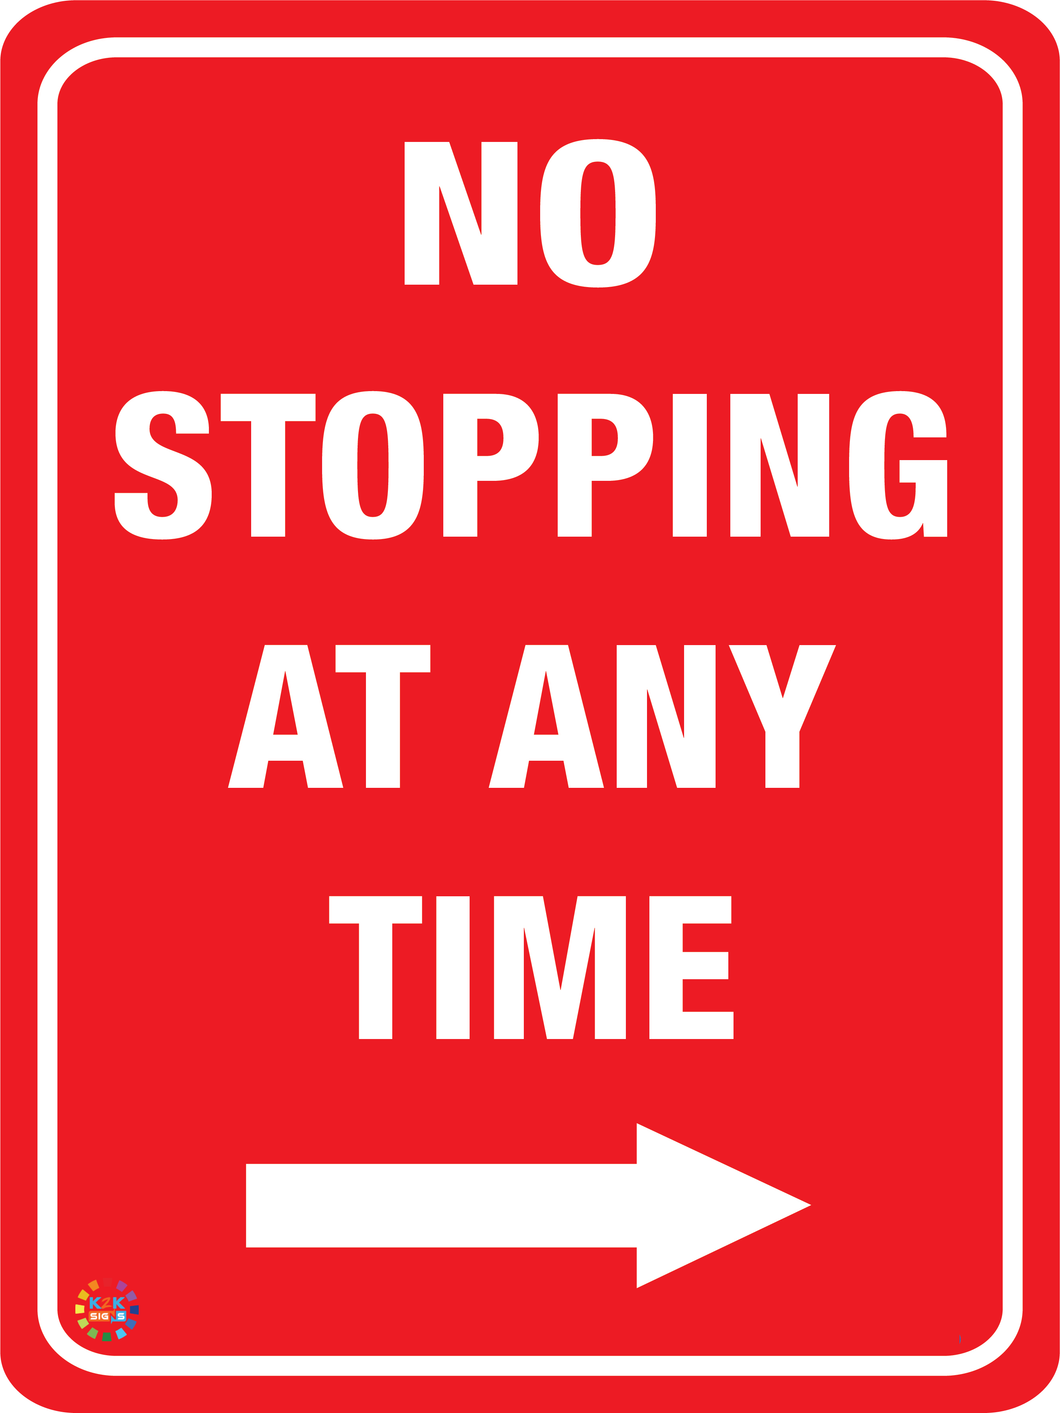 No Stopping Any Time (Right Arrow) Sign